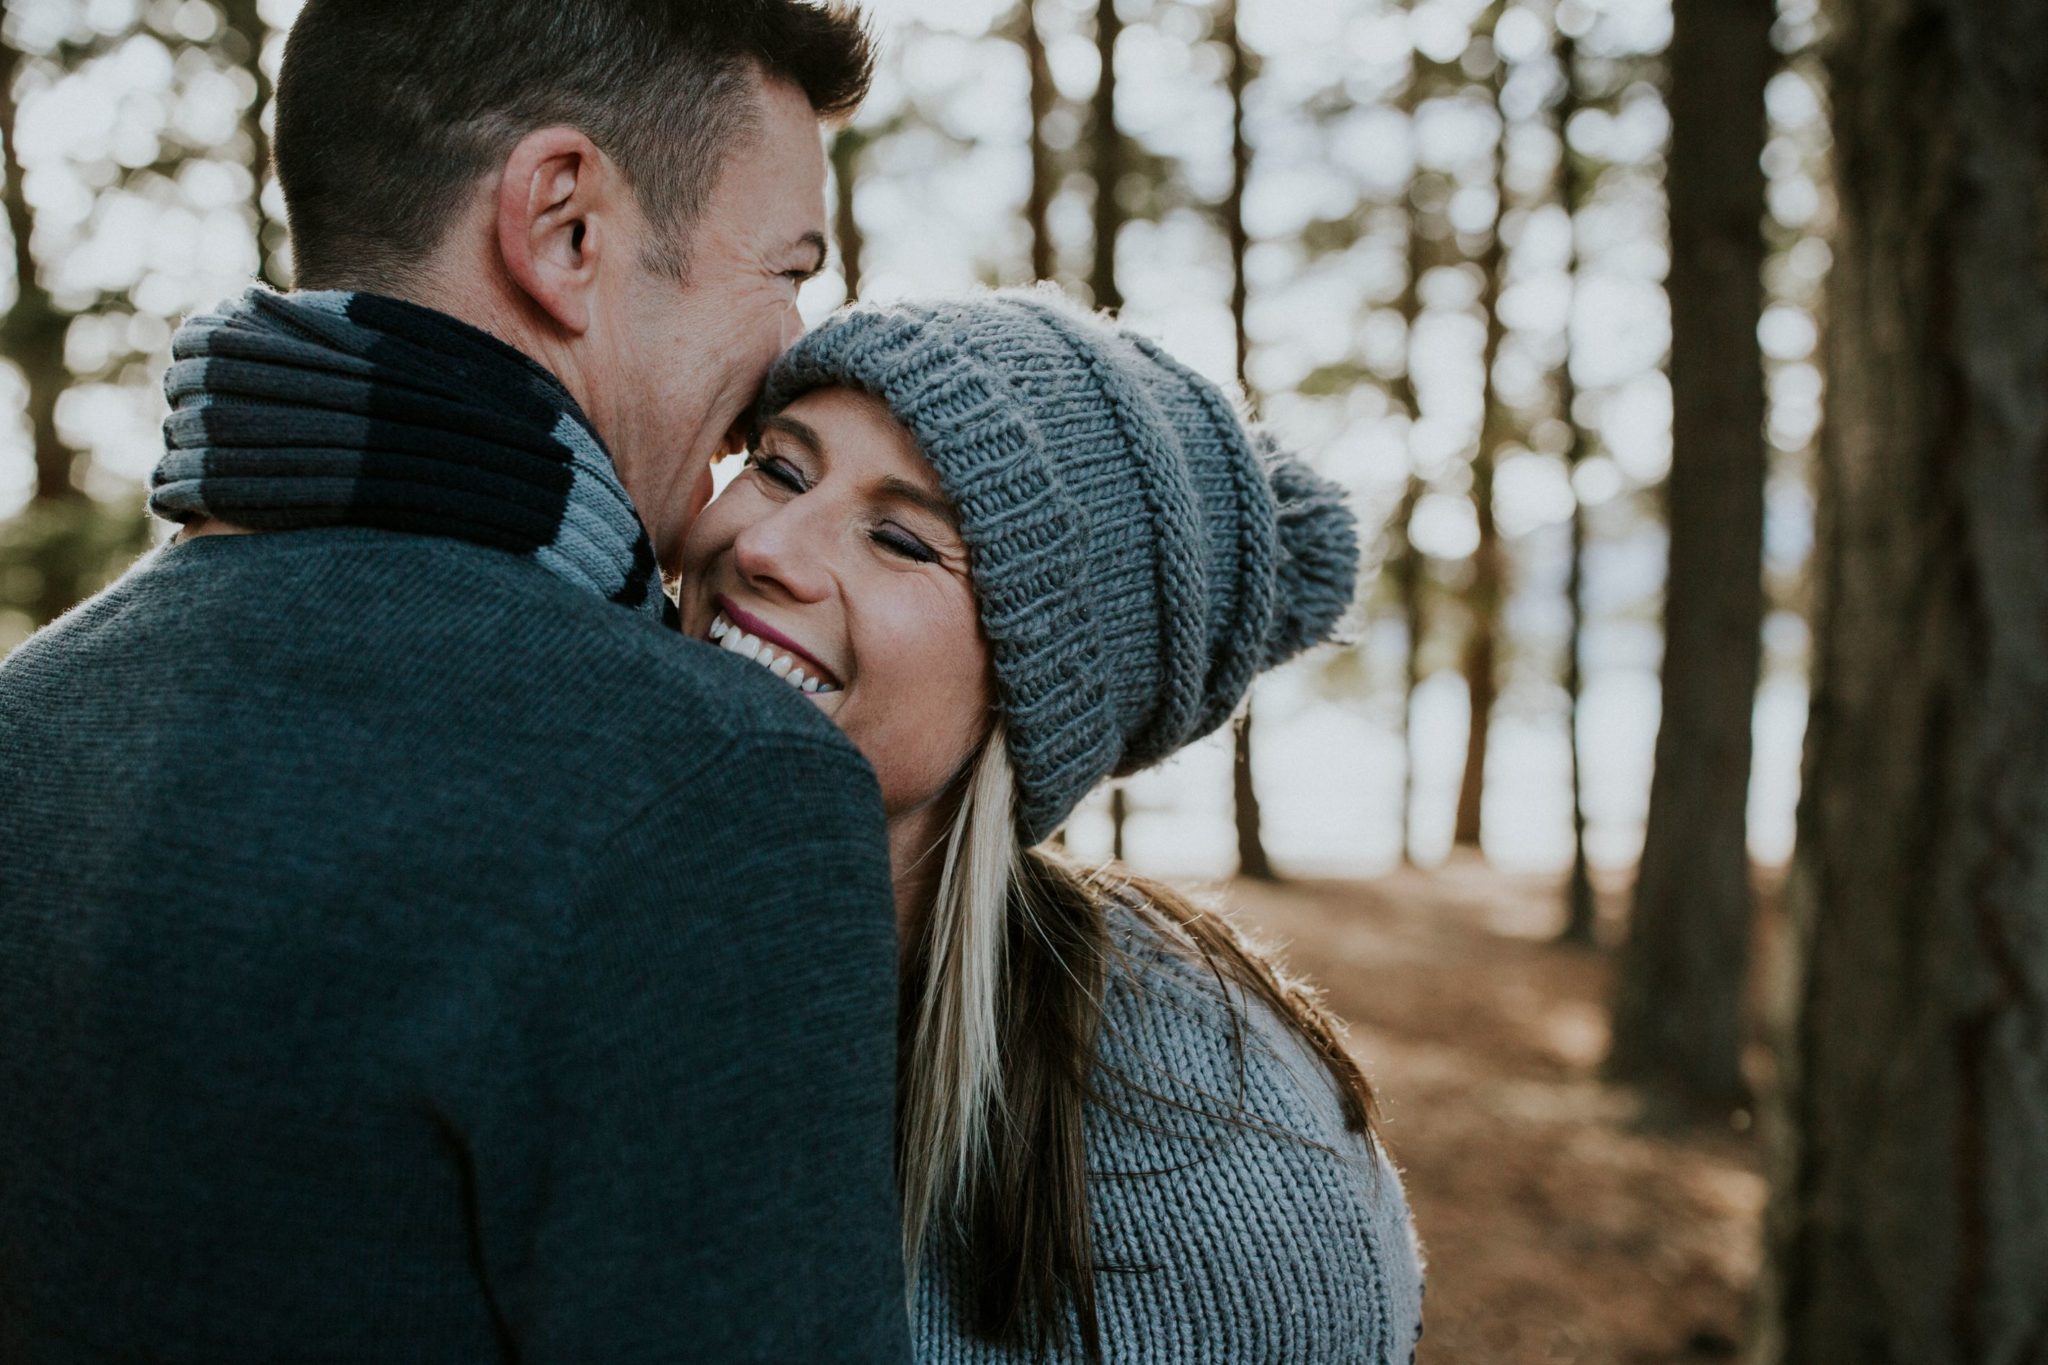 Charlotte Kiri Photography - Engagement Photography with a happy couple smiling wearing winter knitwear, and embracing in the trees of a forest in Wanaka, New Zealand